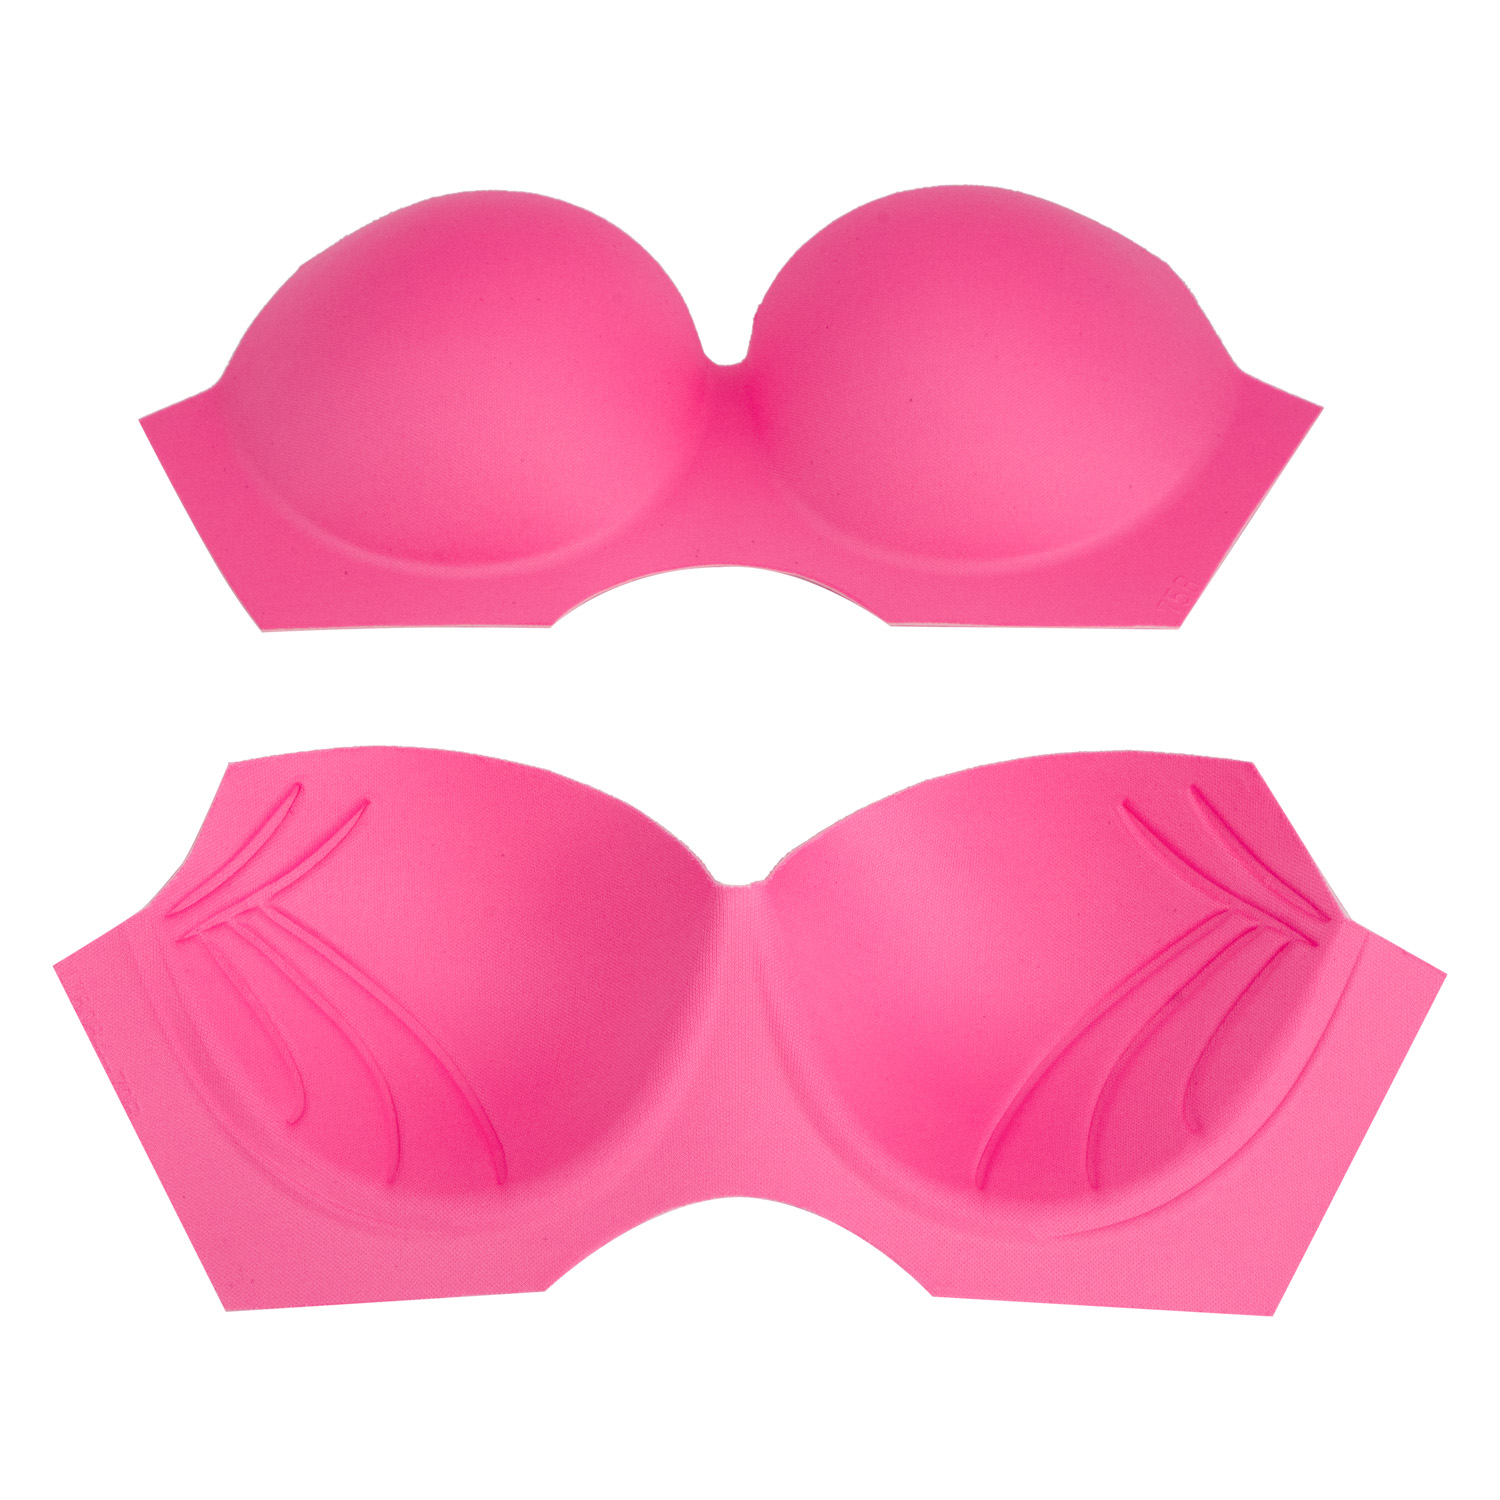  Breathable and Absorbent Conjoined Foam Bra Cup for Sexy Underwear